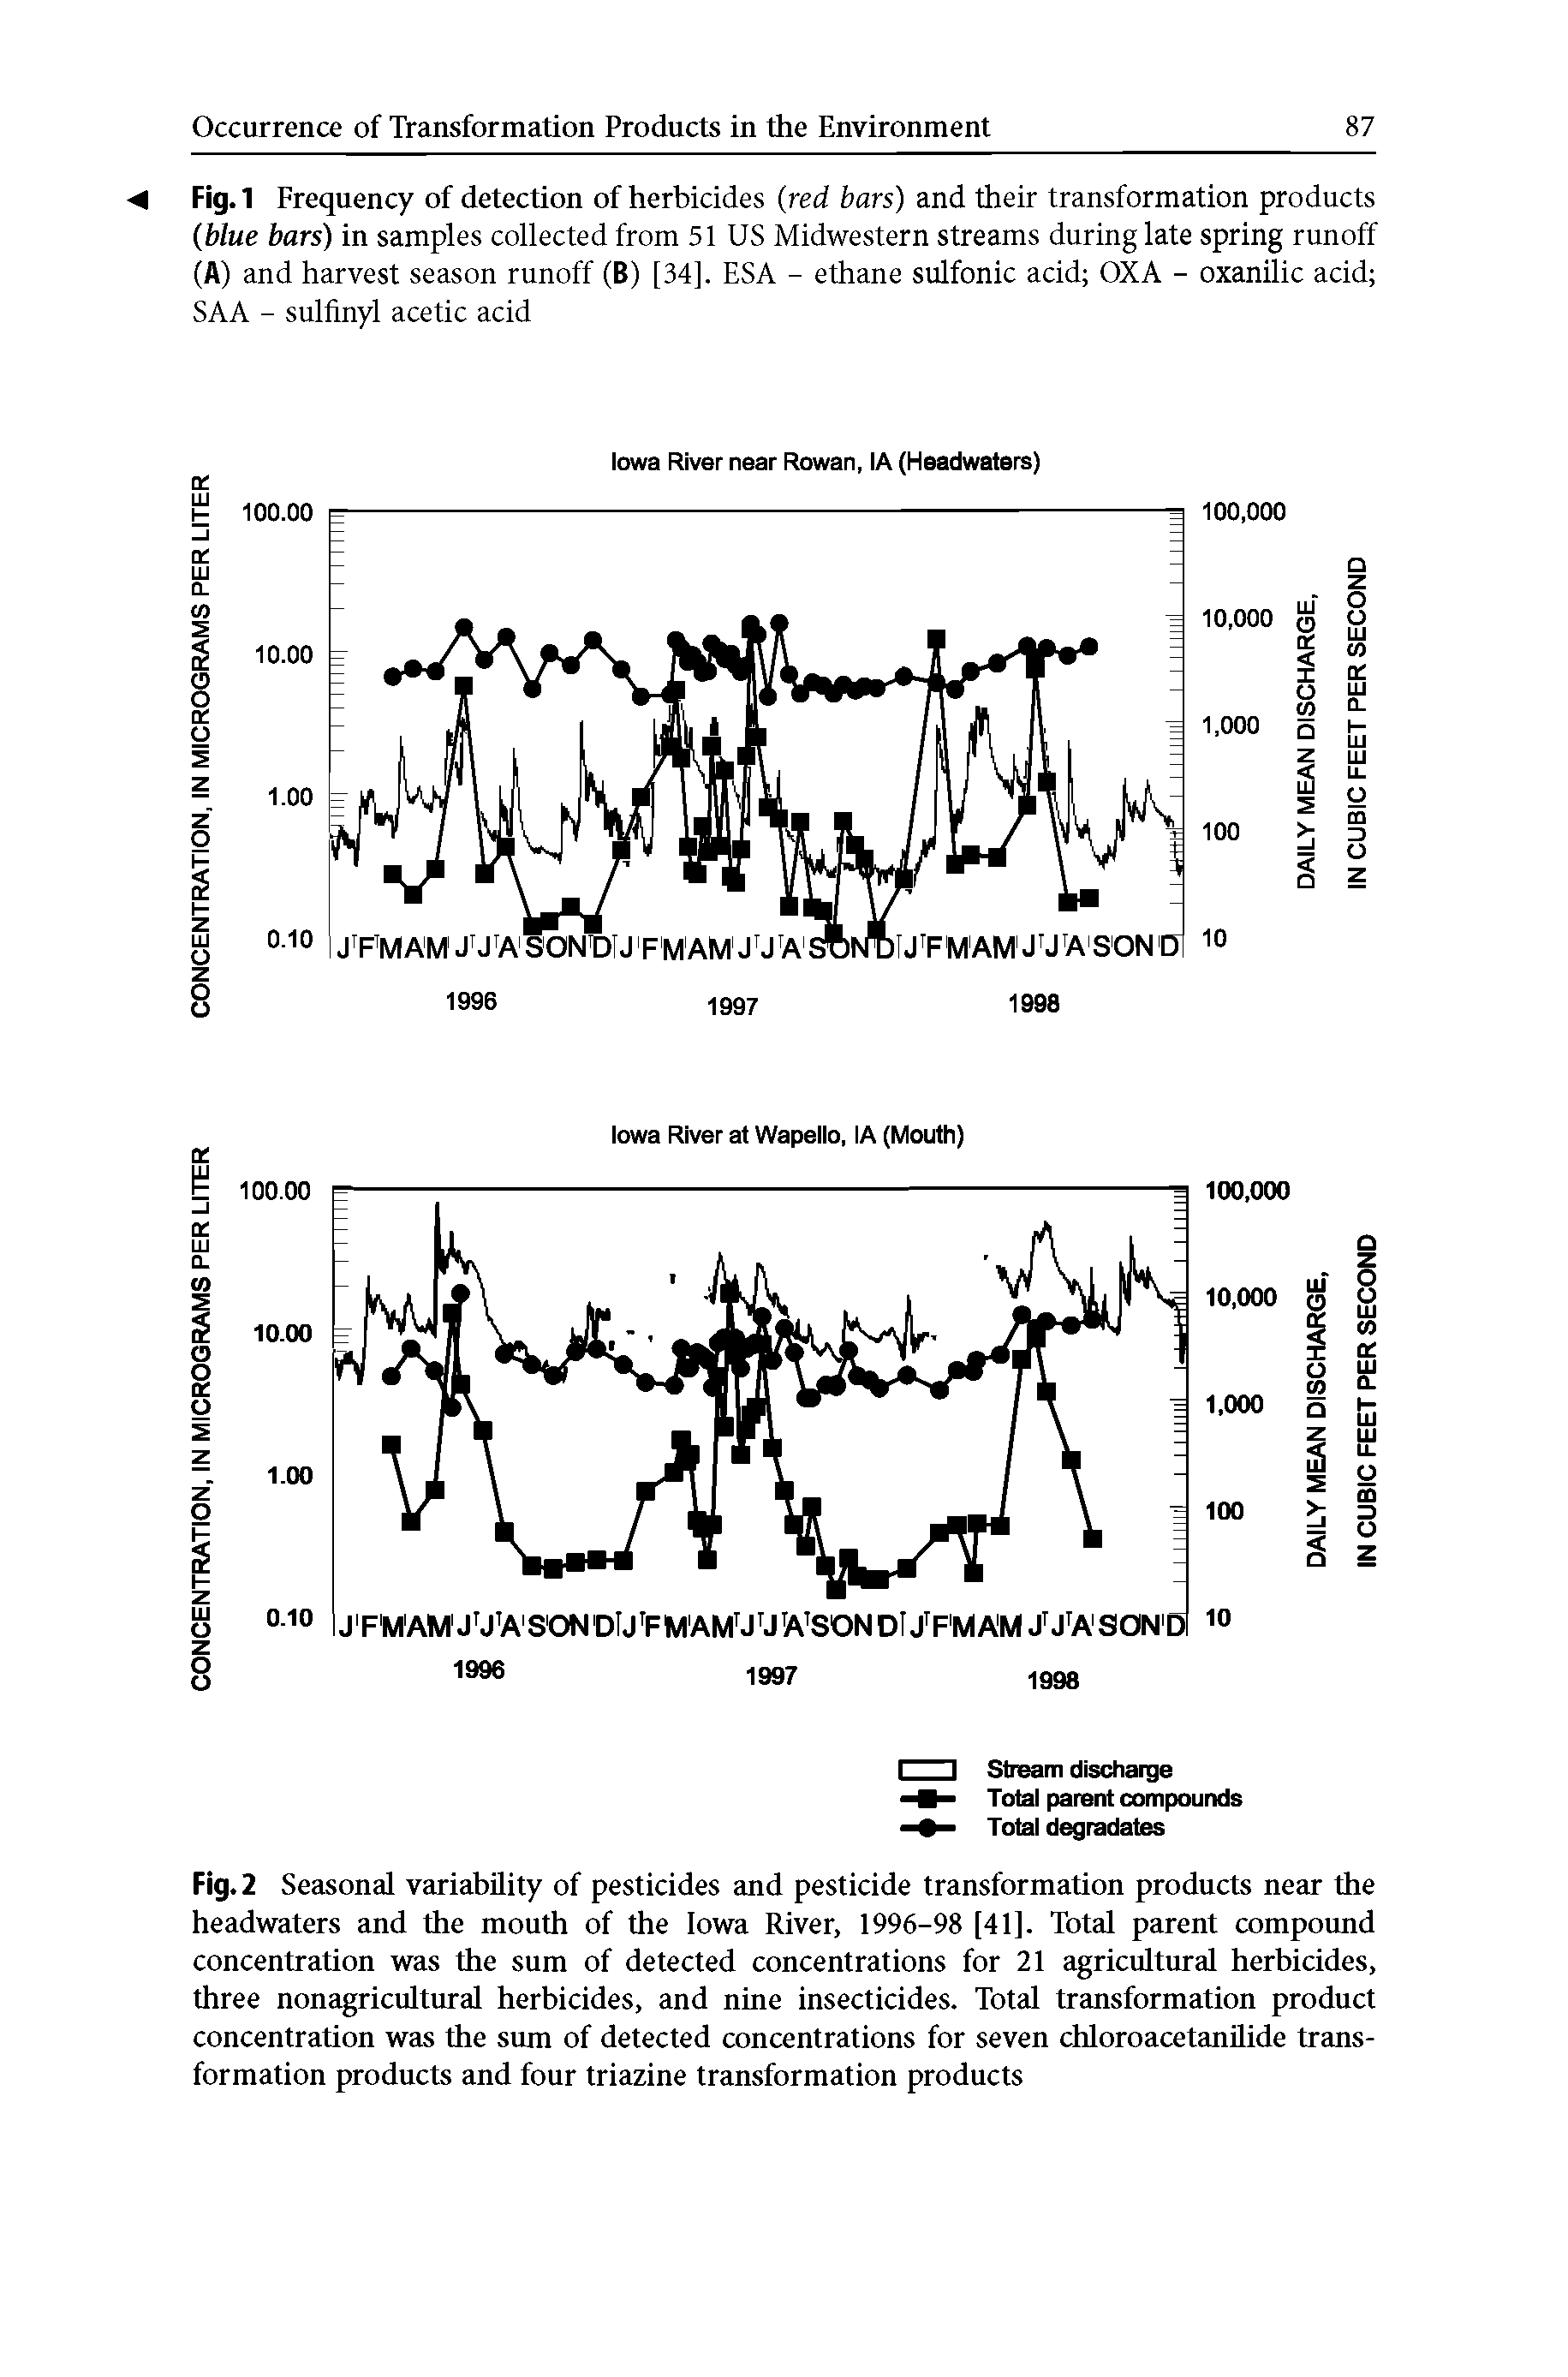 Fig. 2 Seasonal variability of pesticides and pesticide transformation products near the headwaters and the mouth of the Iowa River, 1996-98 [41]. Total parent compoimd concentration was the sum of detected concentrations for 21 agricultimal herbicides, three nonagricultiu al herbicides, and nine insecticides. Total transformation product concentration was the smn of detected concentrations for seven chloroacetanilide transformation products and four triazine transformation products...